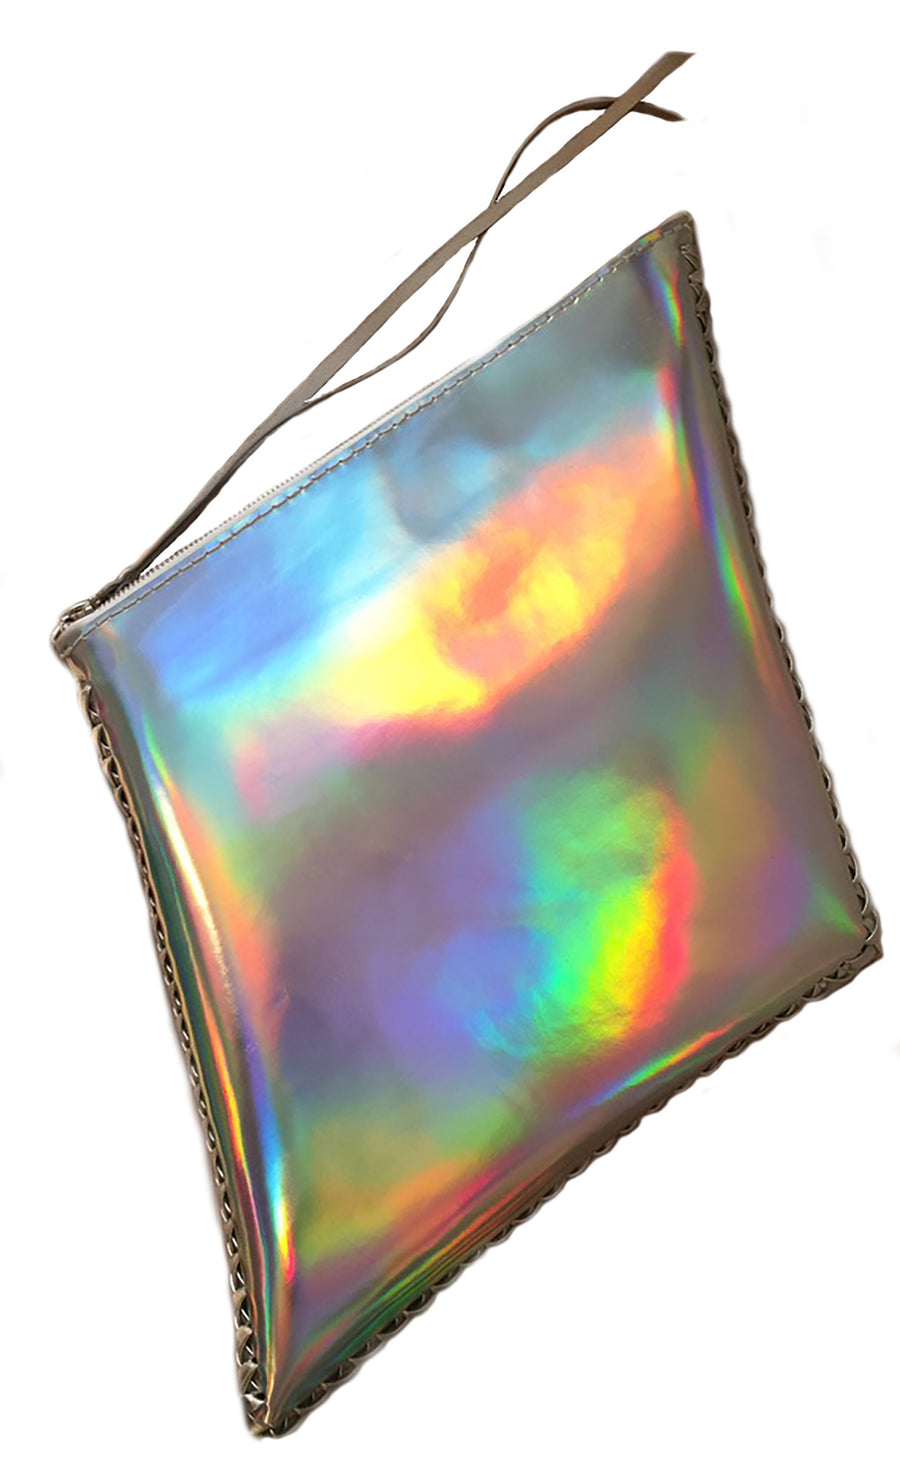 Shiny Reflective Silver Rainbow Patent Leather Diamond Kite Shape Clutch Wendy Nichol Luxury Handbag Purse Designer Handmade in NYC New York City Large Thin Structured Clutch Evening Red Carpet High Quality Leather Maggie Laine IMG Model